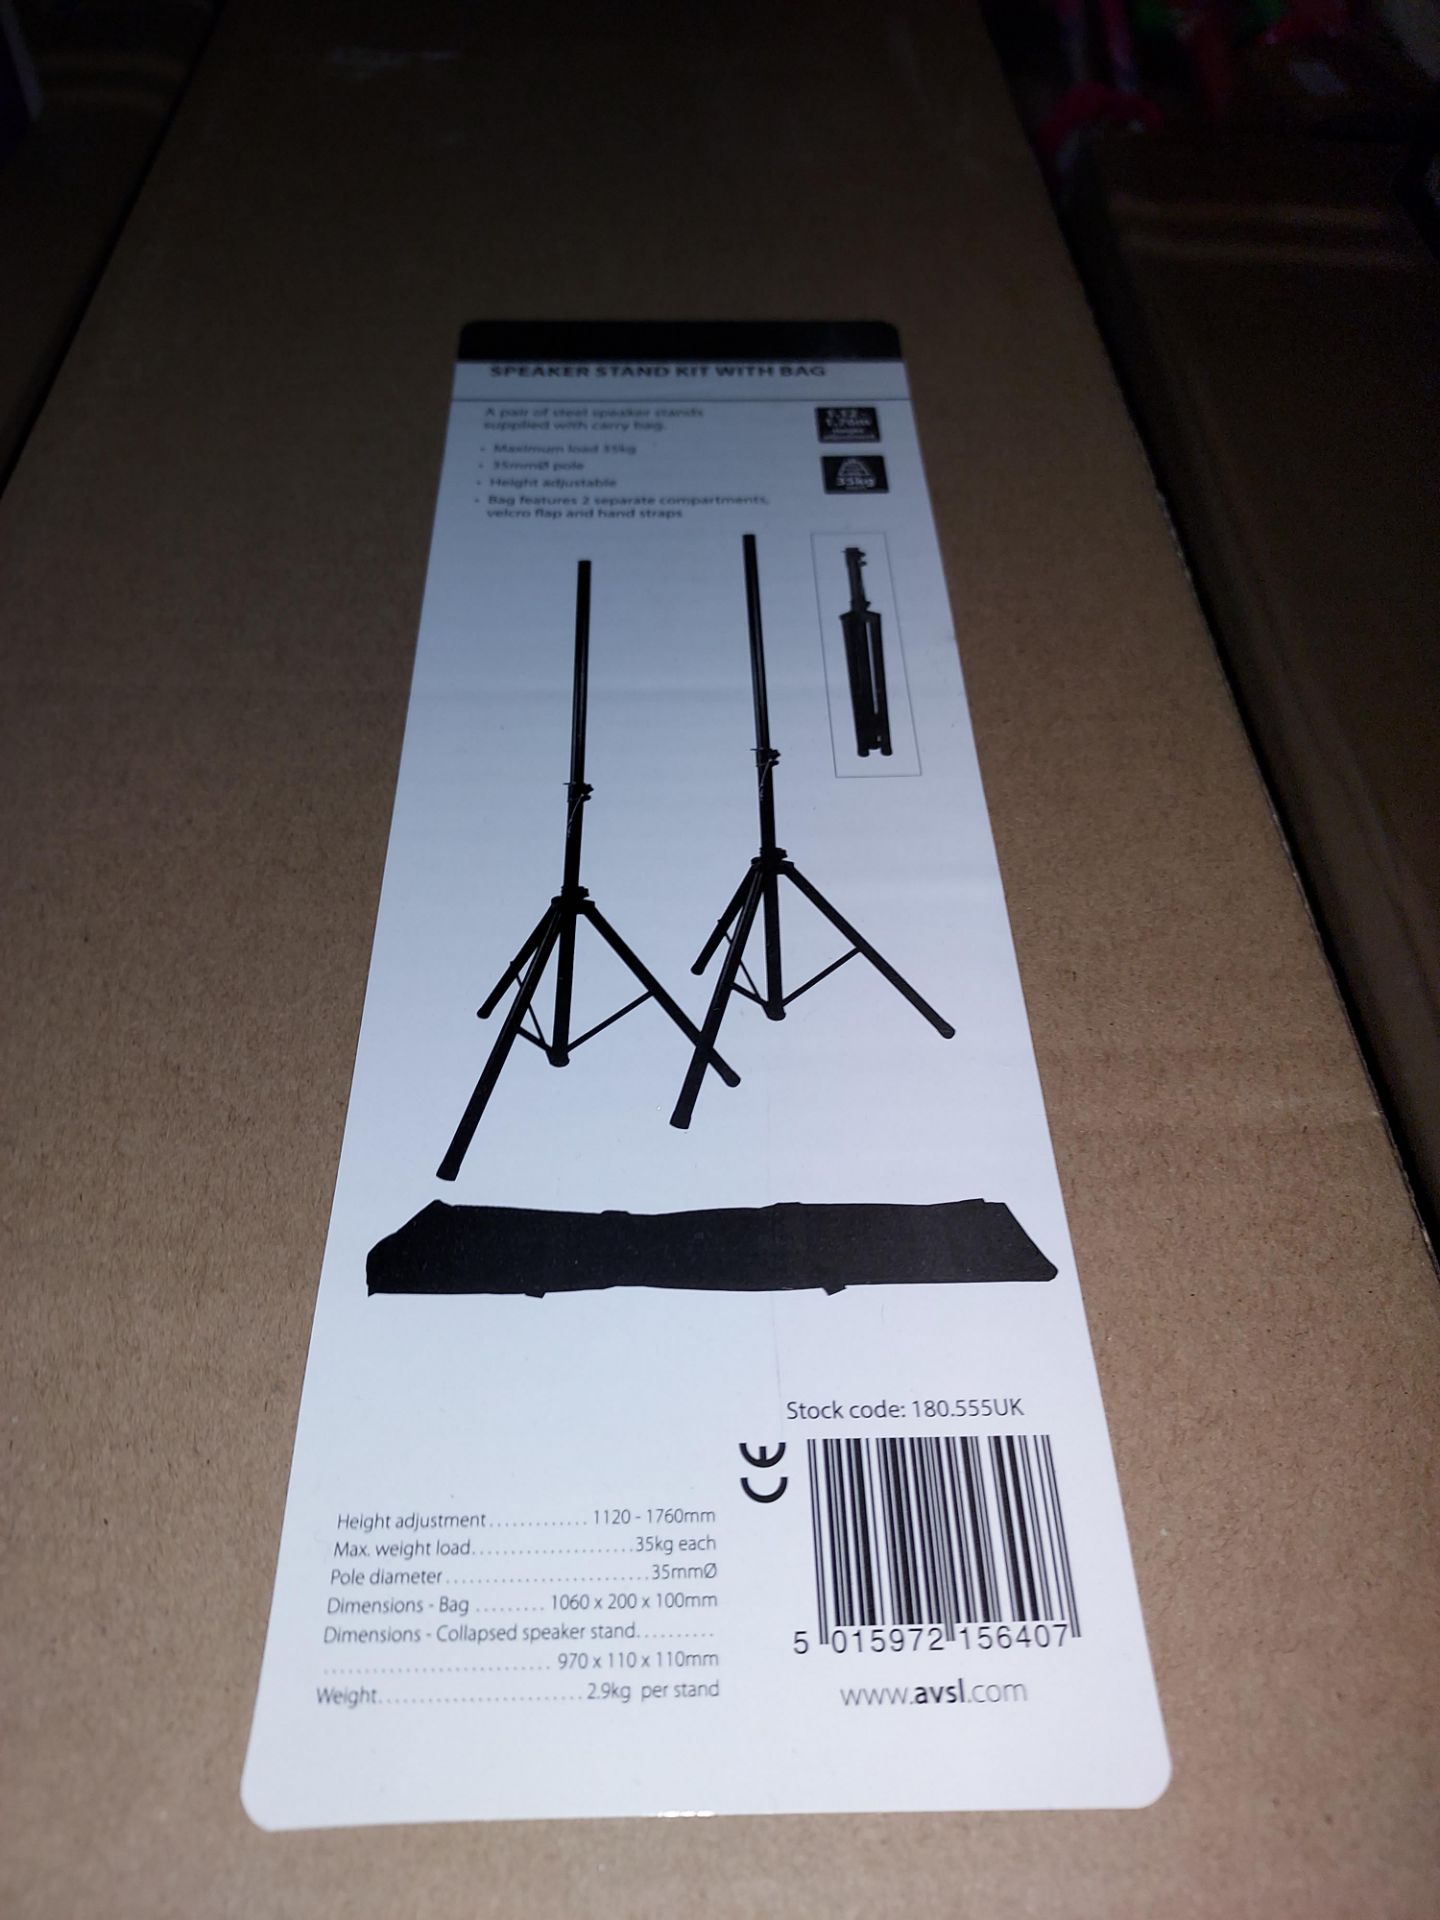 3 X PAIRS OF BRAND NEW 1.12-1.76CM SPEAKER STAND KITS WITH BAG (UNBRANDED)